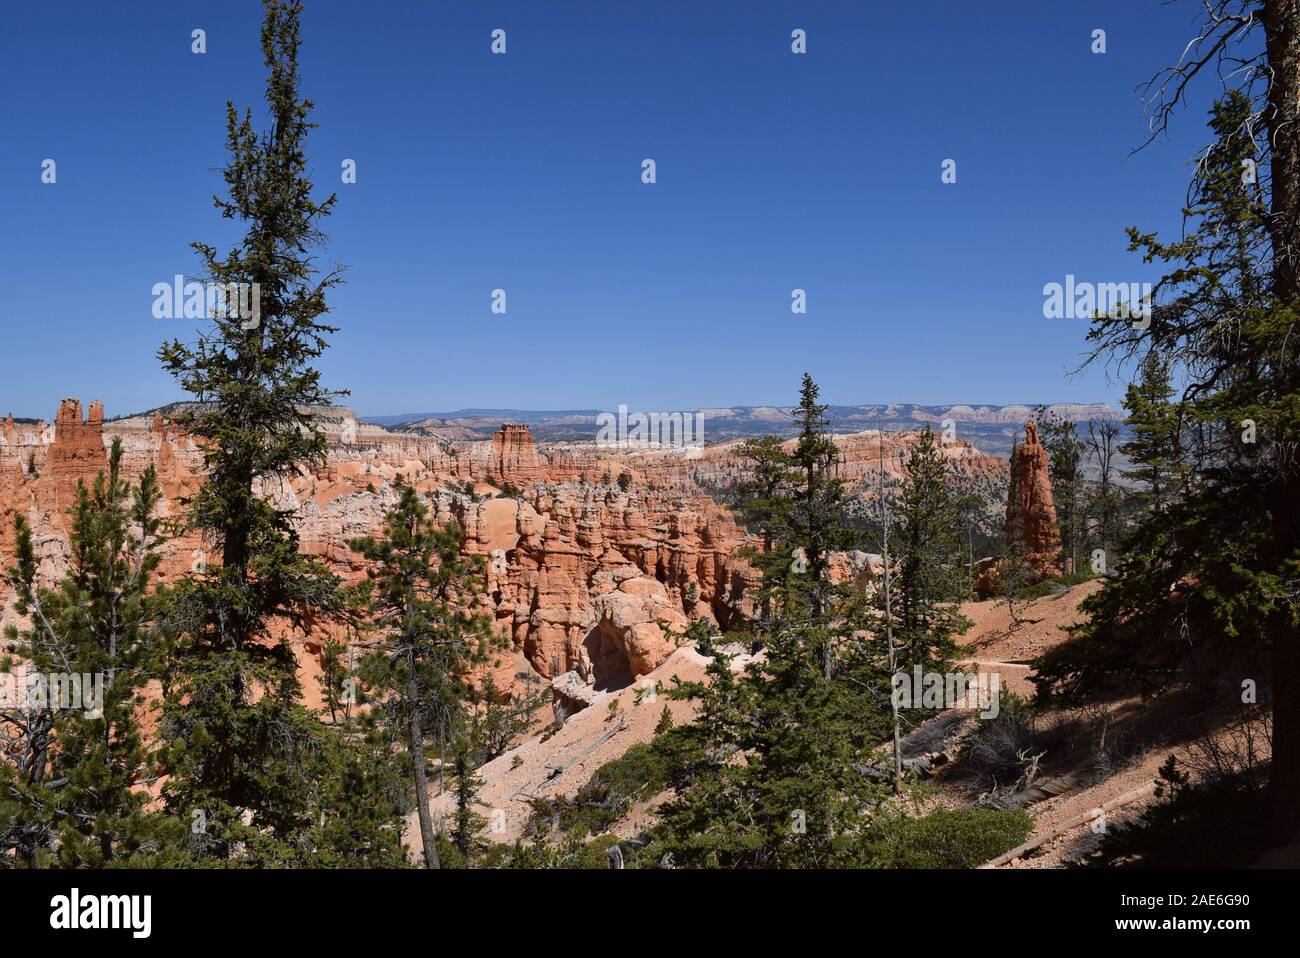 Some of the many hoodoos present at Bryce Canyon, formed through millions of years of geological activity on the Colorado Plateau. Stock Photo